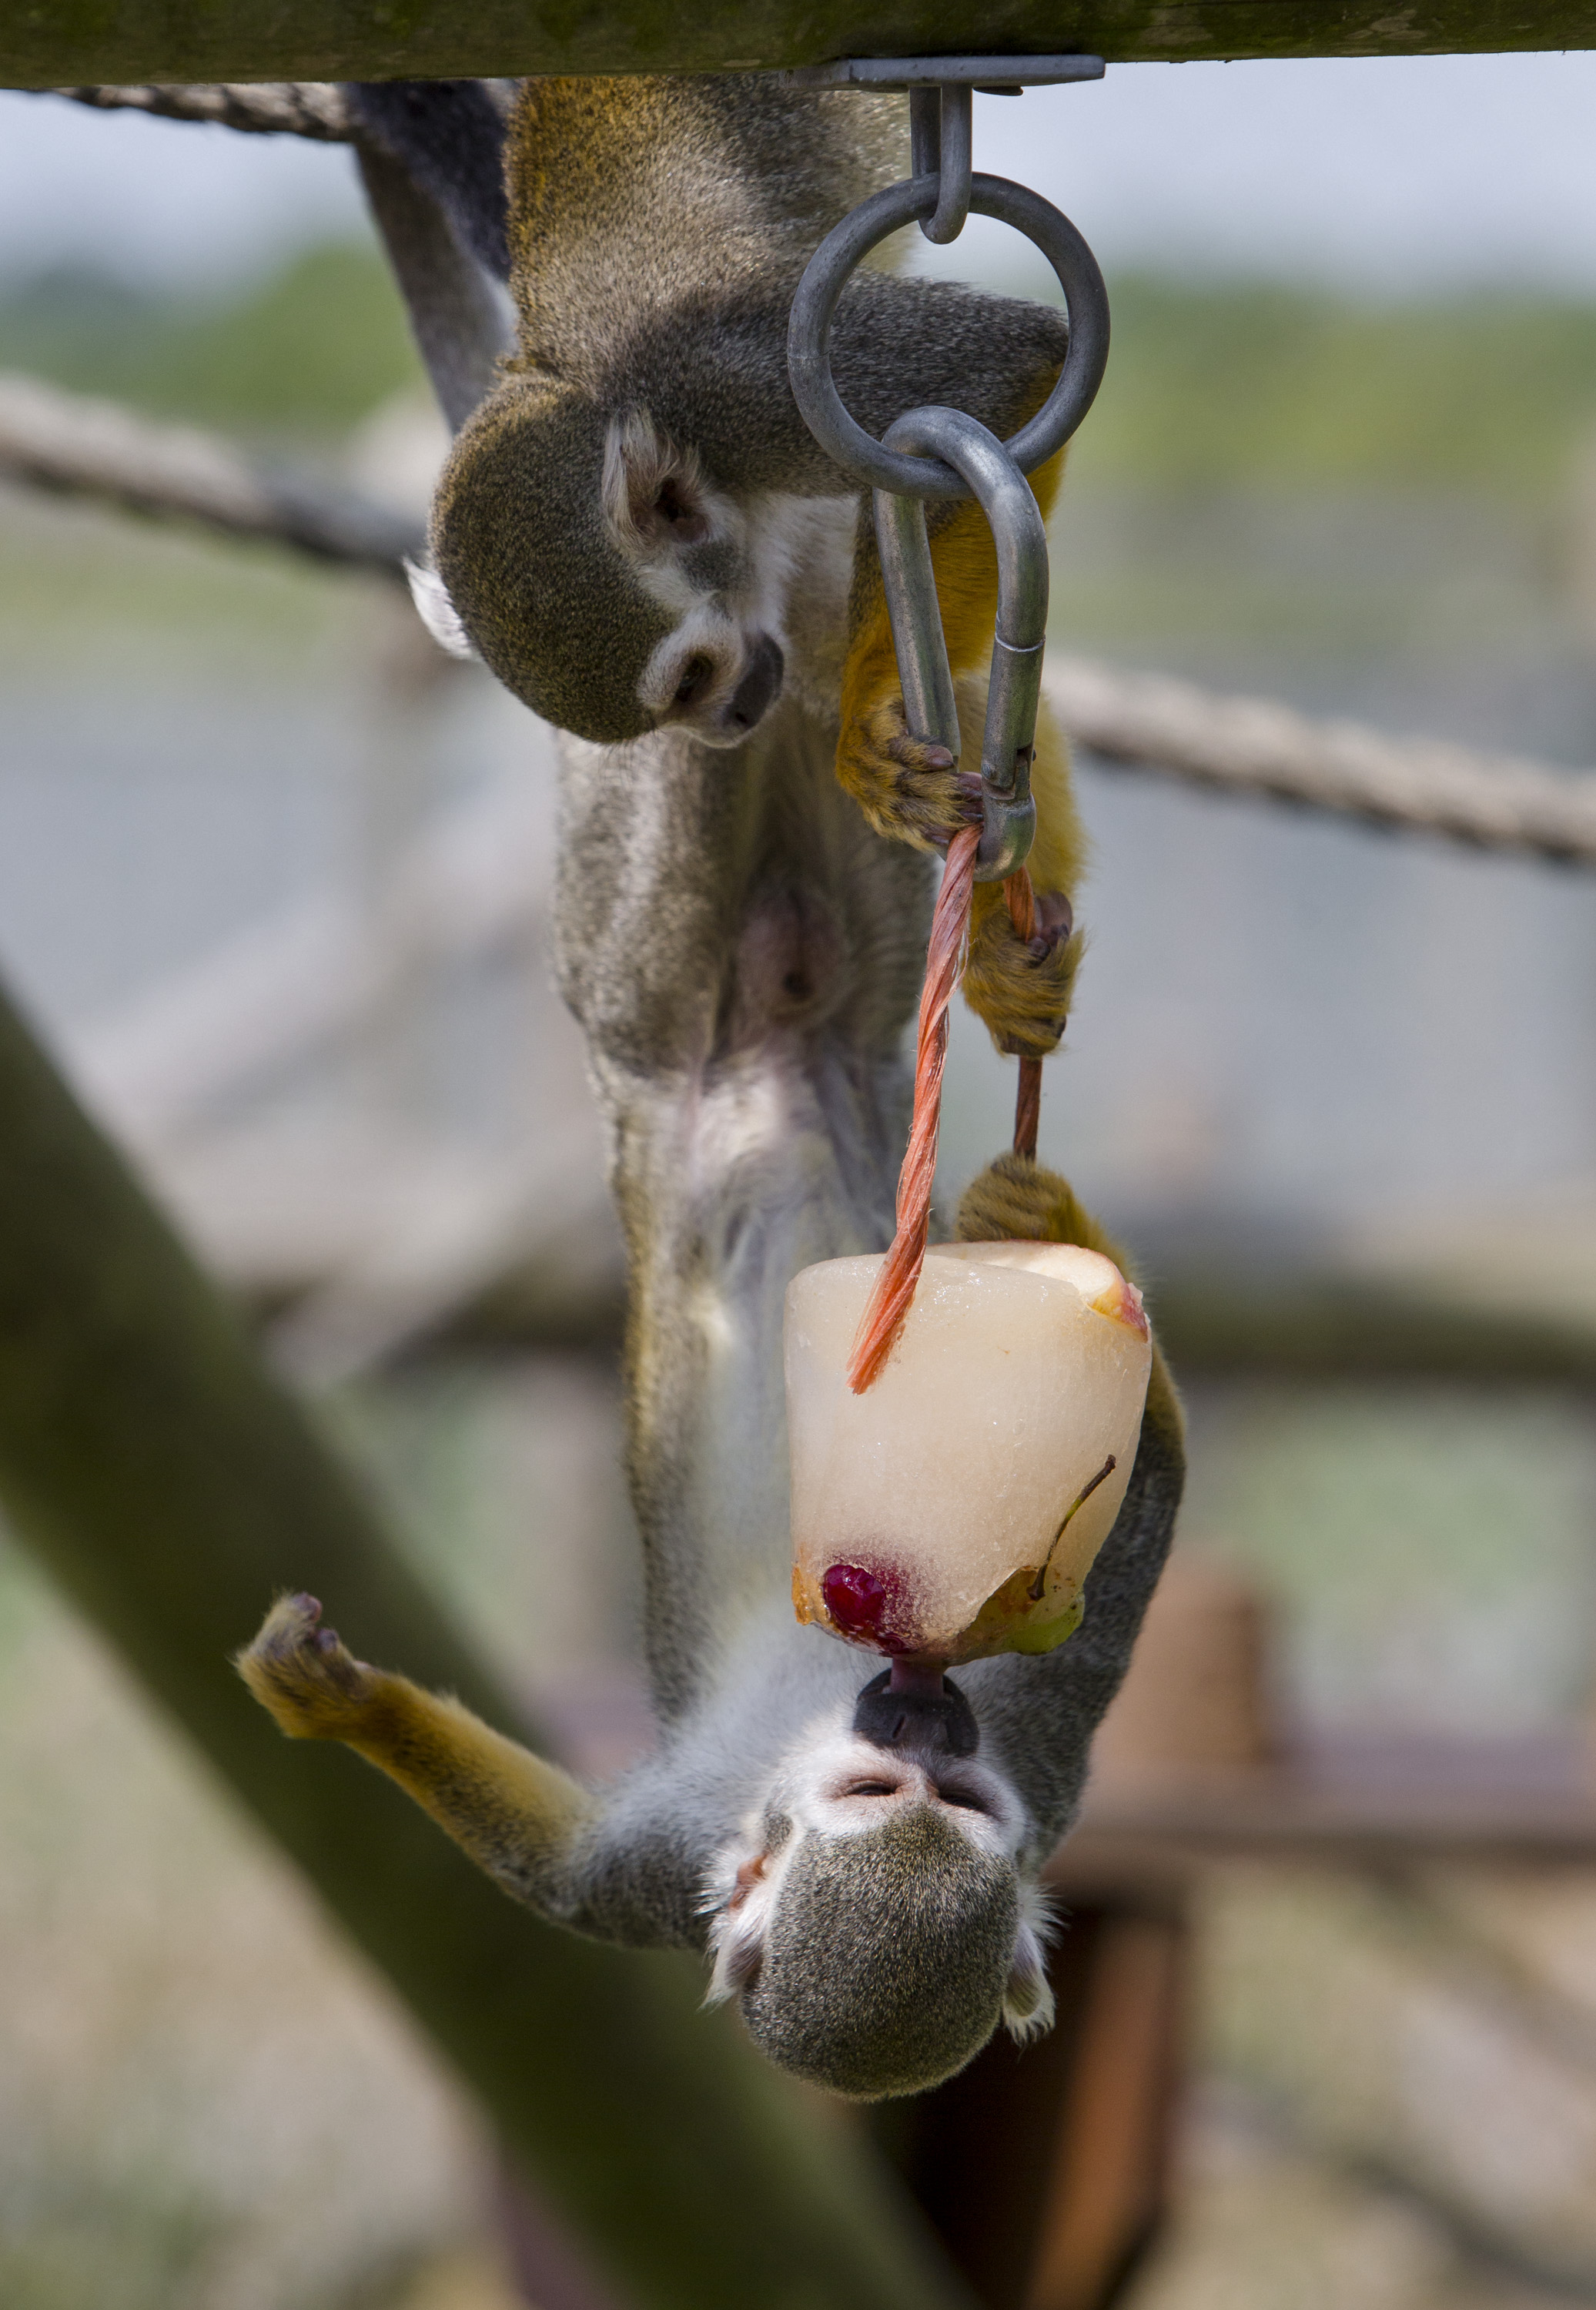 Squirrel monkey eating a lolly